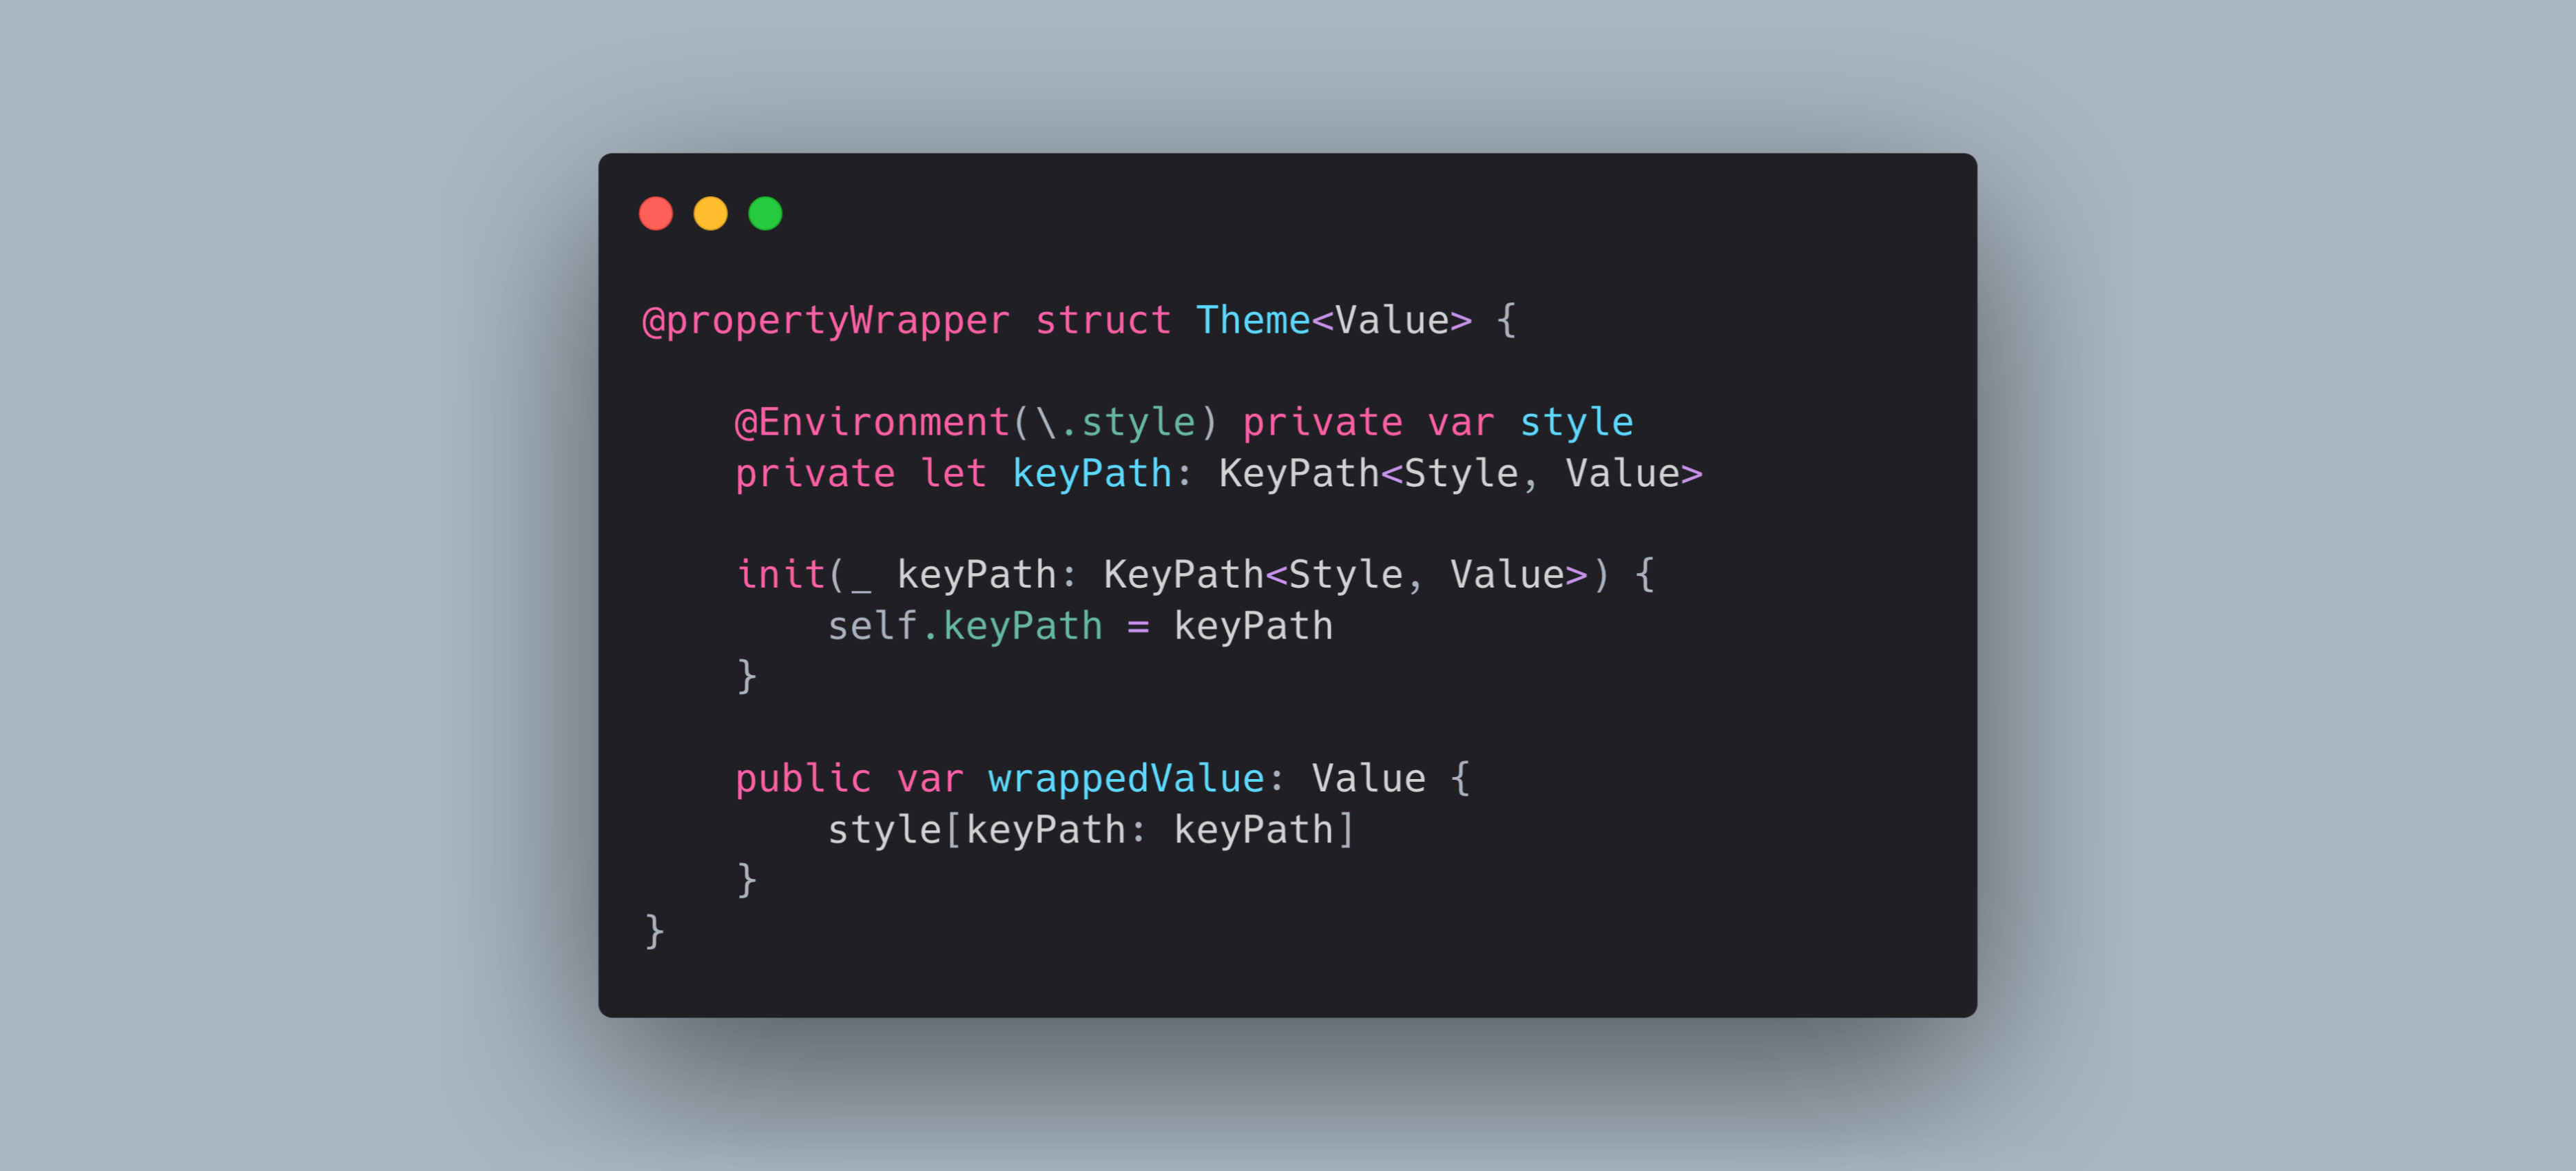 The property wrapper you will find in chapter 3 “Styles in Environment”